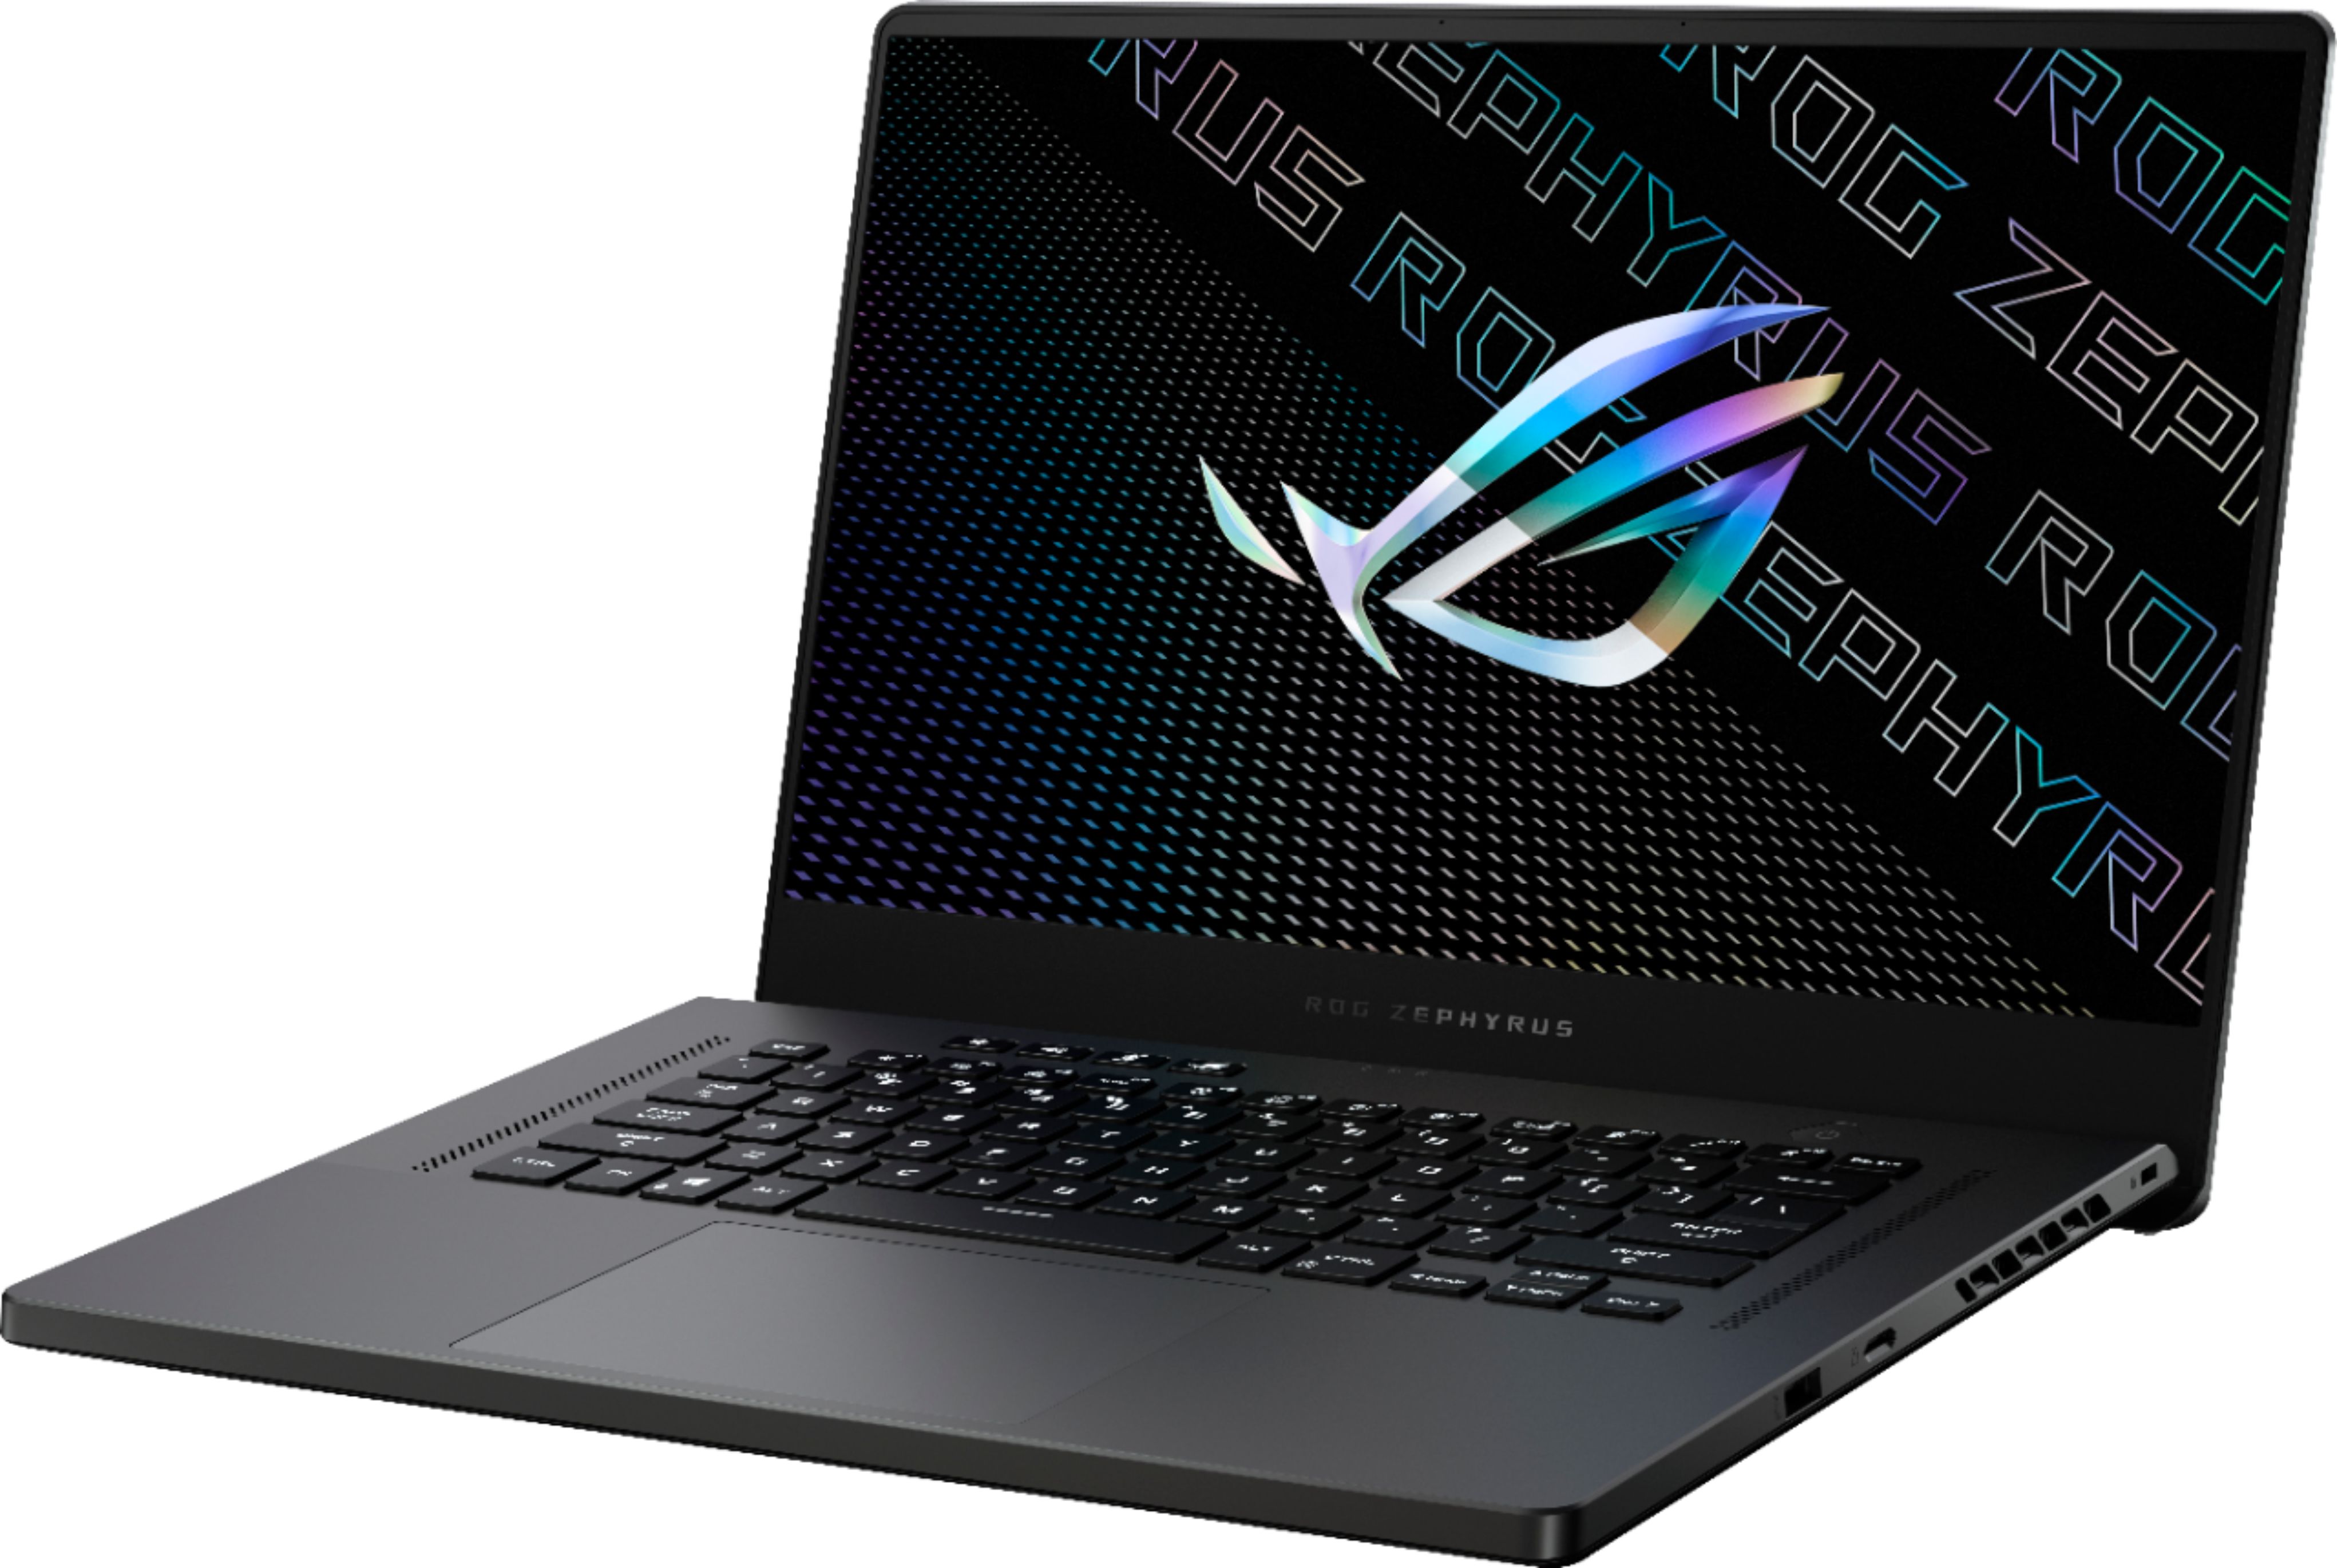 Angle View: ASUS - ROG Zephyrus 15.6" QHD Gaming Laptop - AMD Ryzen 9 - 16GB Memory - NVIDIA GeForce RTX 3070 - 1TB SSD - Eclipse Gray